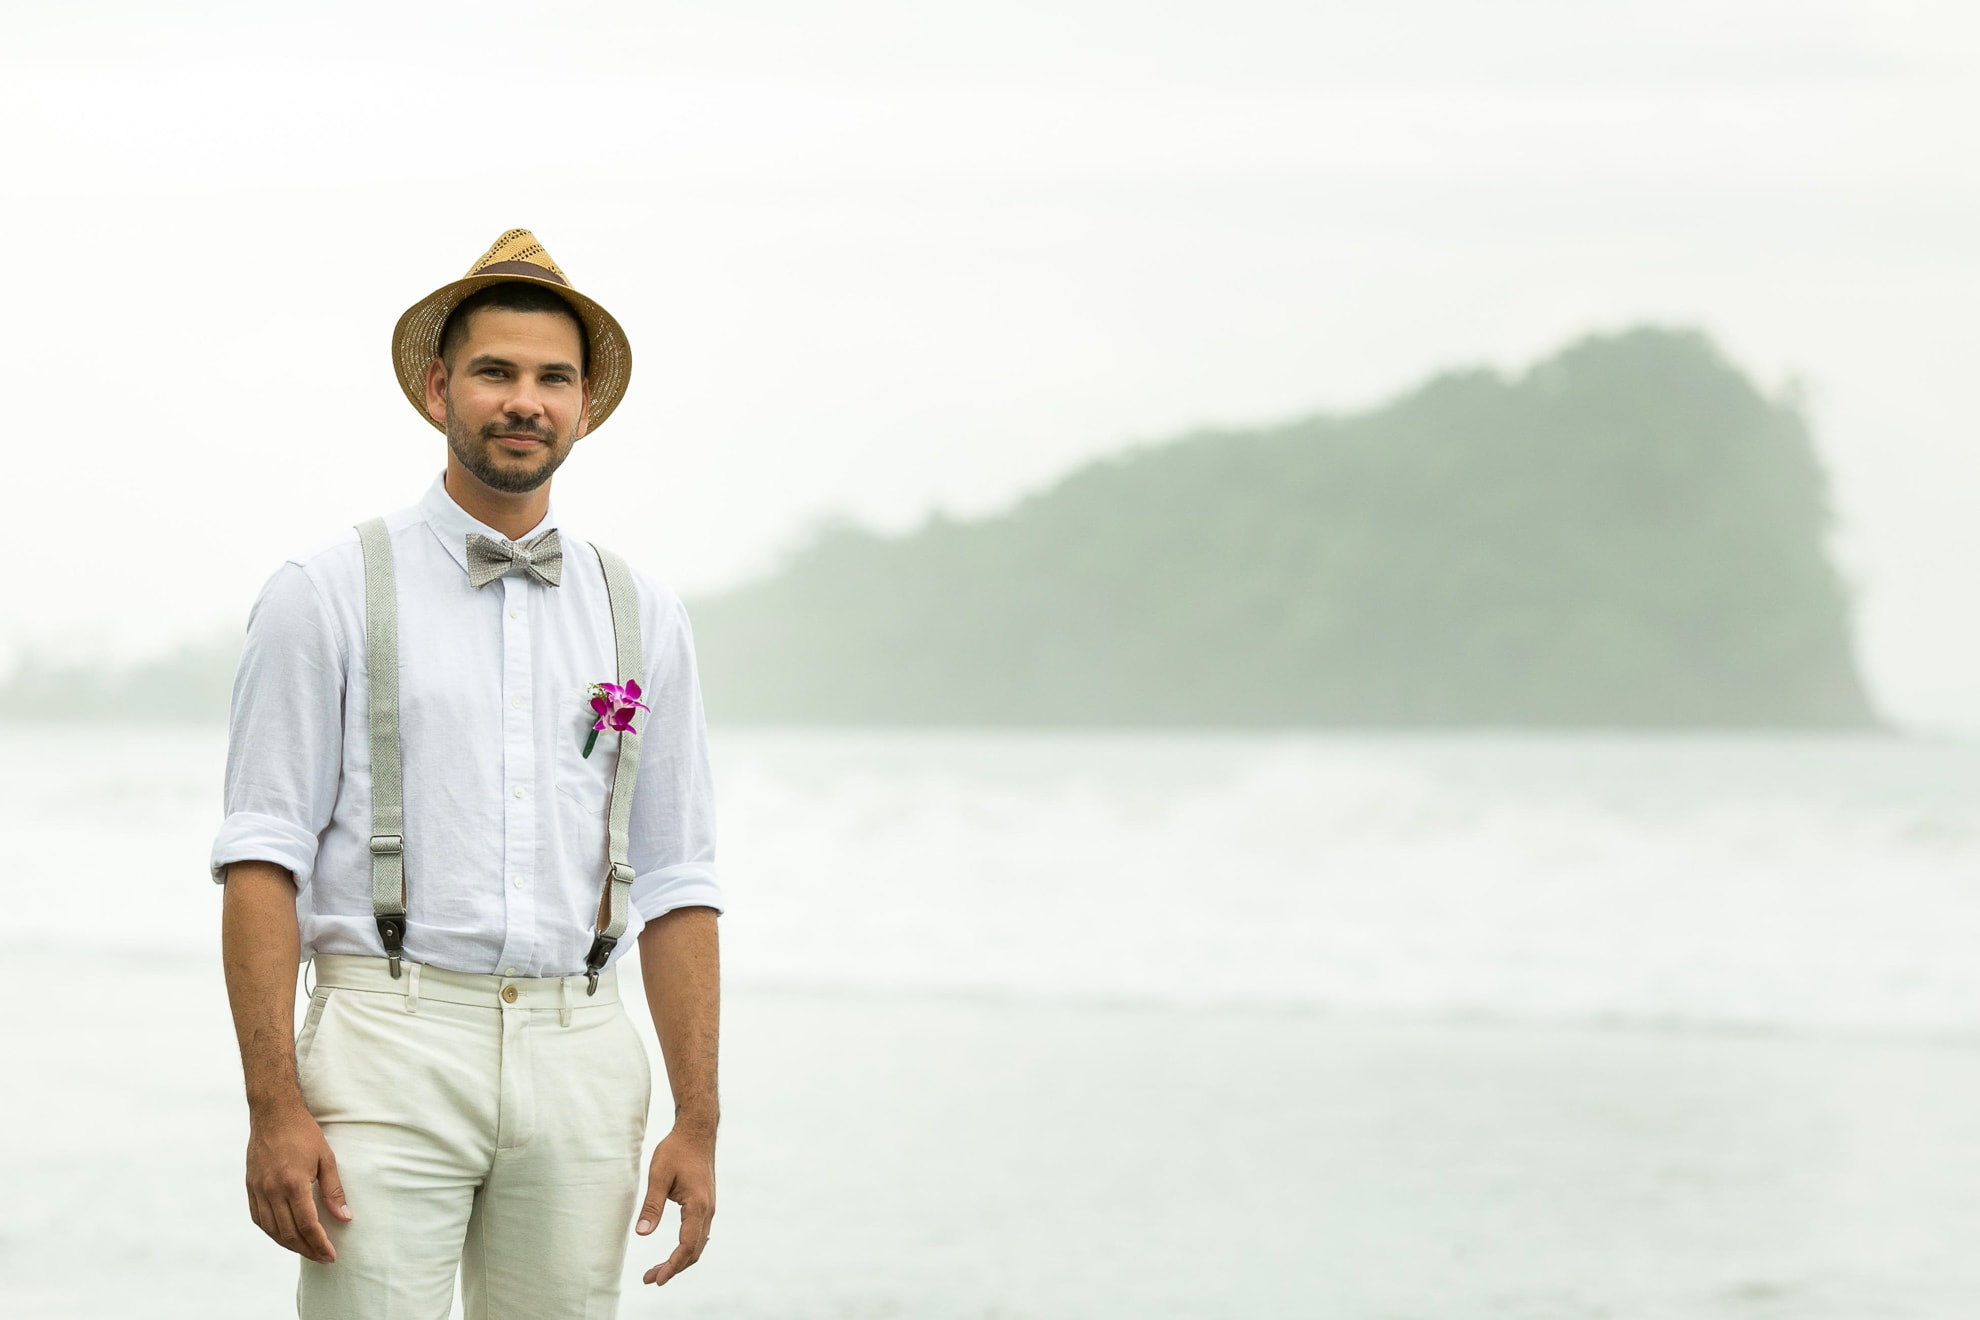 Groom at wedding in Costa Rica